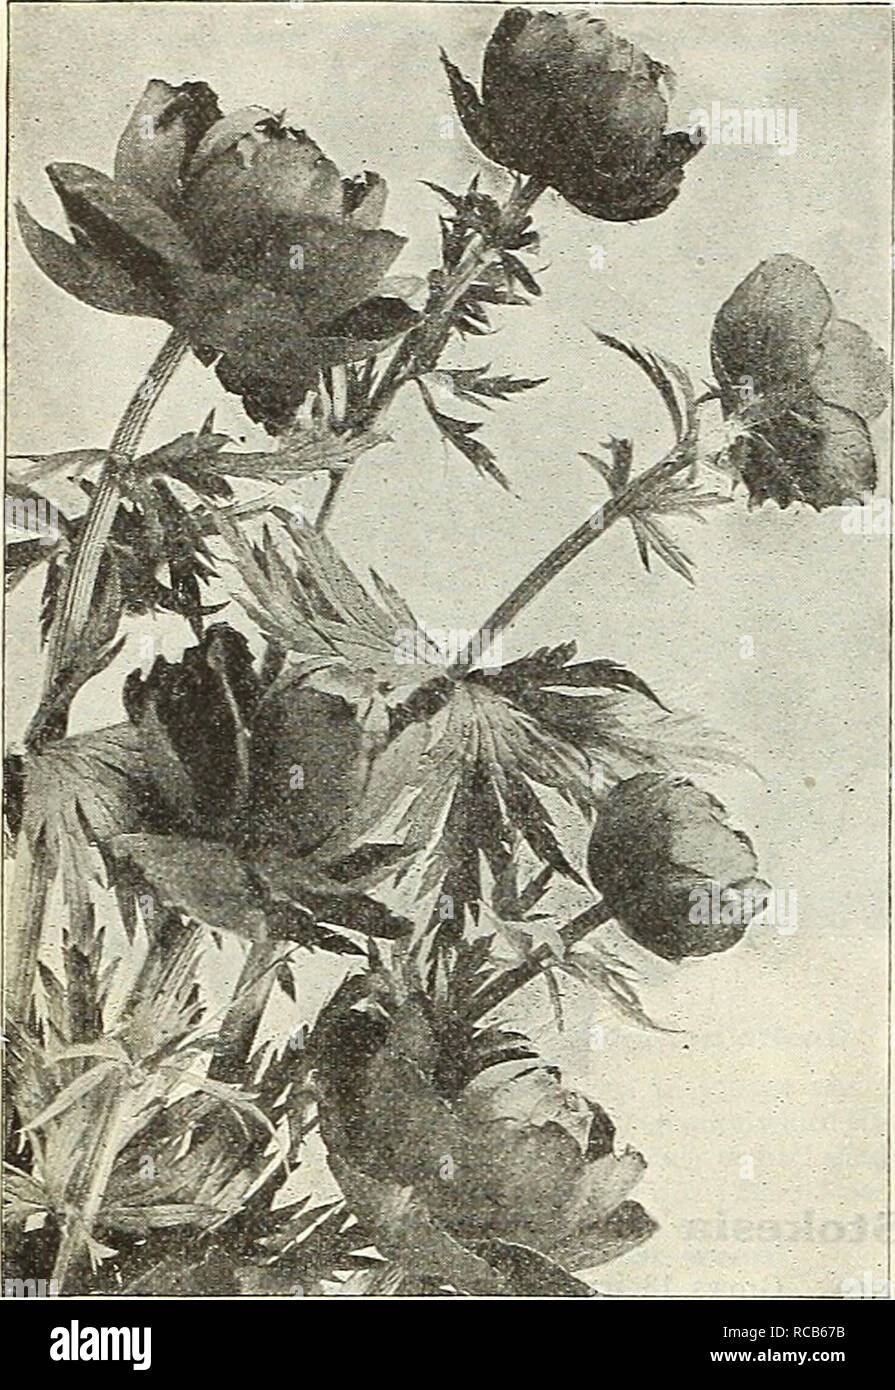 . Dreer's autumn catalogue 1928. Bulbs (Plants) Catalogs; Flowers Seeds Catalogs; Gardening Equipment and supplies Catalogs; Nurseries (Horticulture) Catalogs; Vegetables Seeds Catalogs. 46 /flEwyAJim'^ HARDY PERENMIALPIANTS MMiPmii. Trollius or Globe Flower Tradescantia (Spider wort) Virginica. Produces a succession of blue flowers all summer; 2 feet. — Alba. A white-flowered form. 25 cts. each; S2.50 per doz. Trollius (Globe Flower) Europaeus Superbus. Desirable free-flowering plants, pro- ducing their giant bright yellow, Buttercup like blossoms on stems 1 to 2 feet high from May until Augu Stock Photo